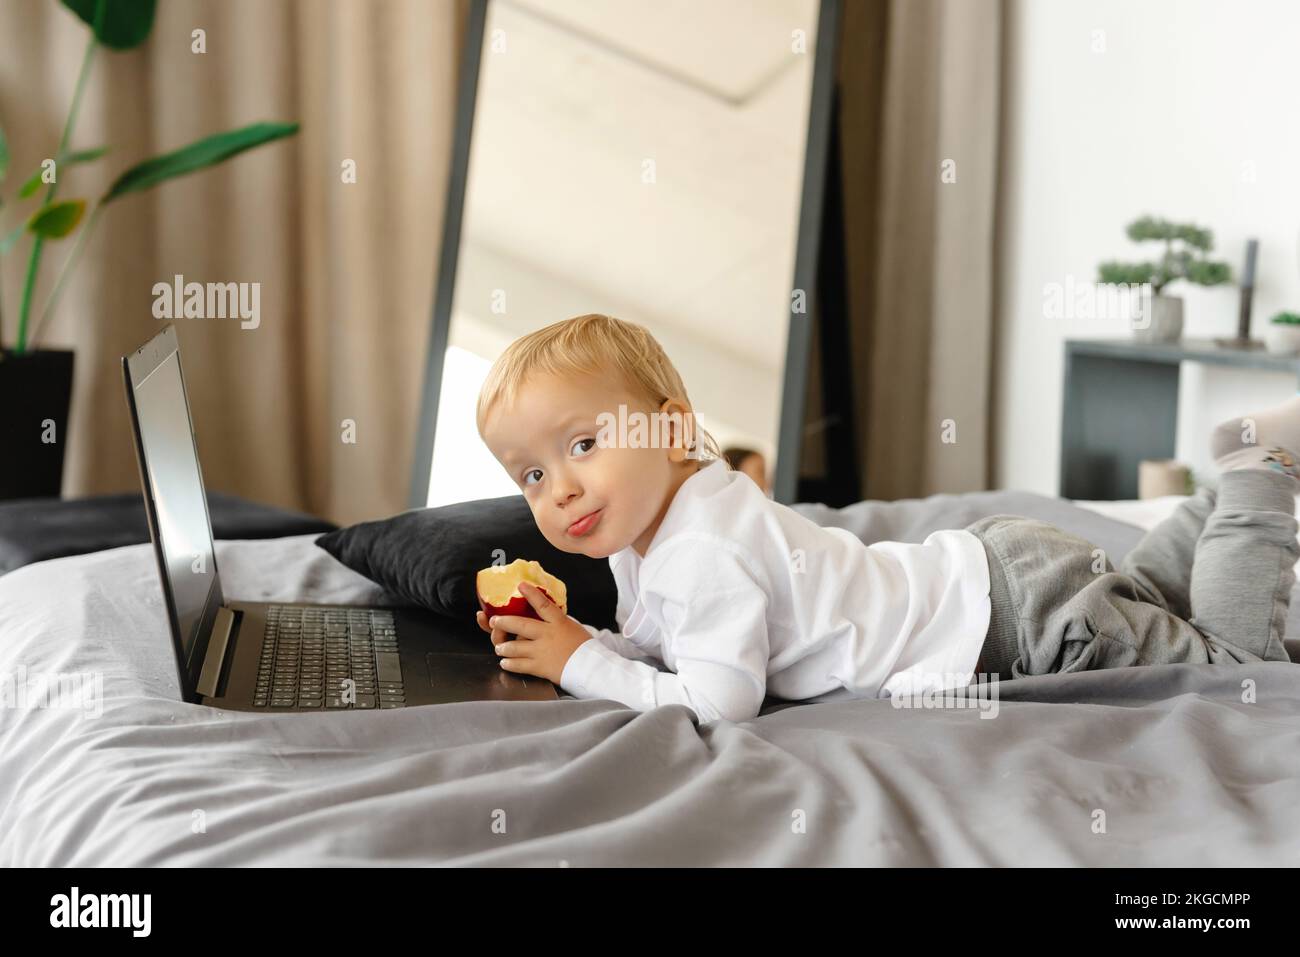 Cute kid is looking at a laptop and holding an apple, the rebonk is playing with the laptop. a smiling child lying on a bed next to his laptop Stock Photo